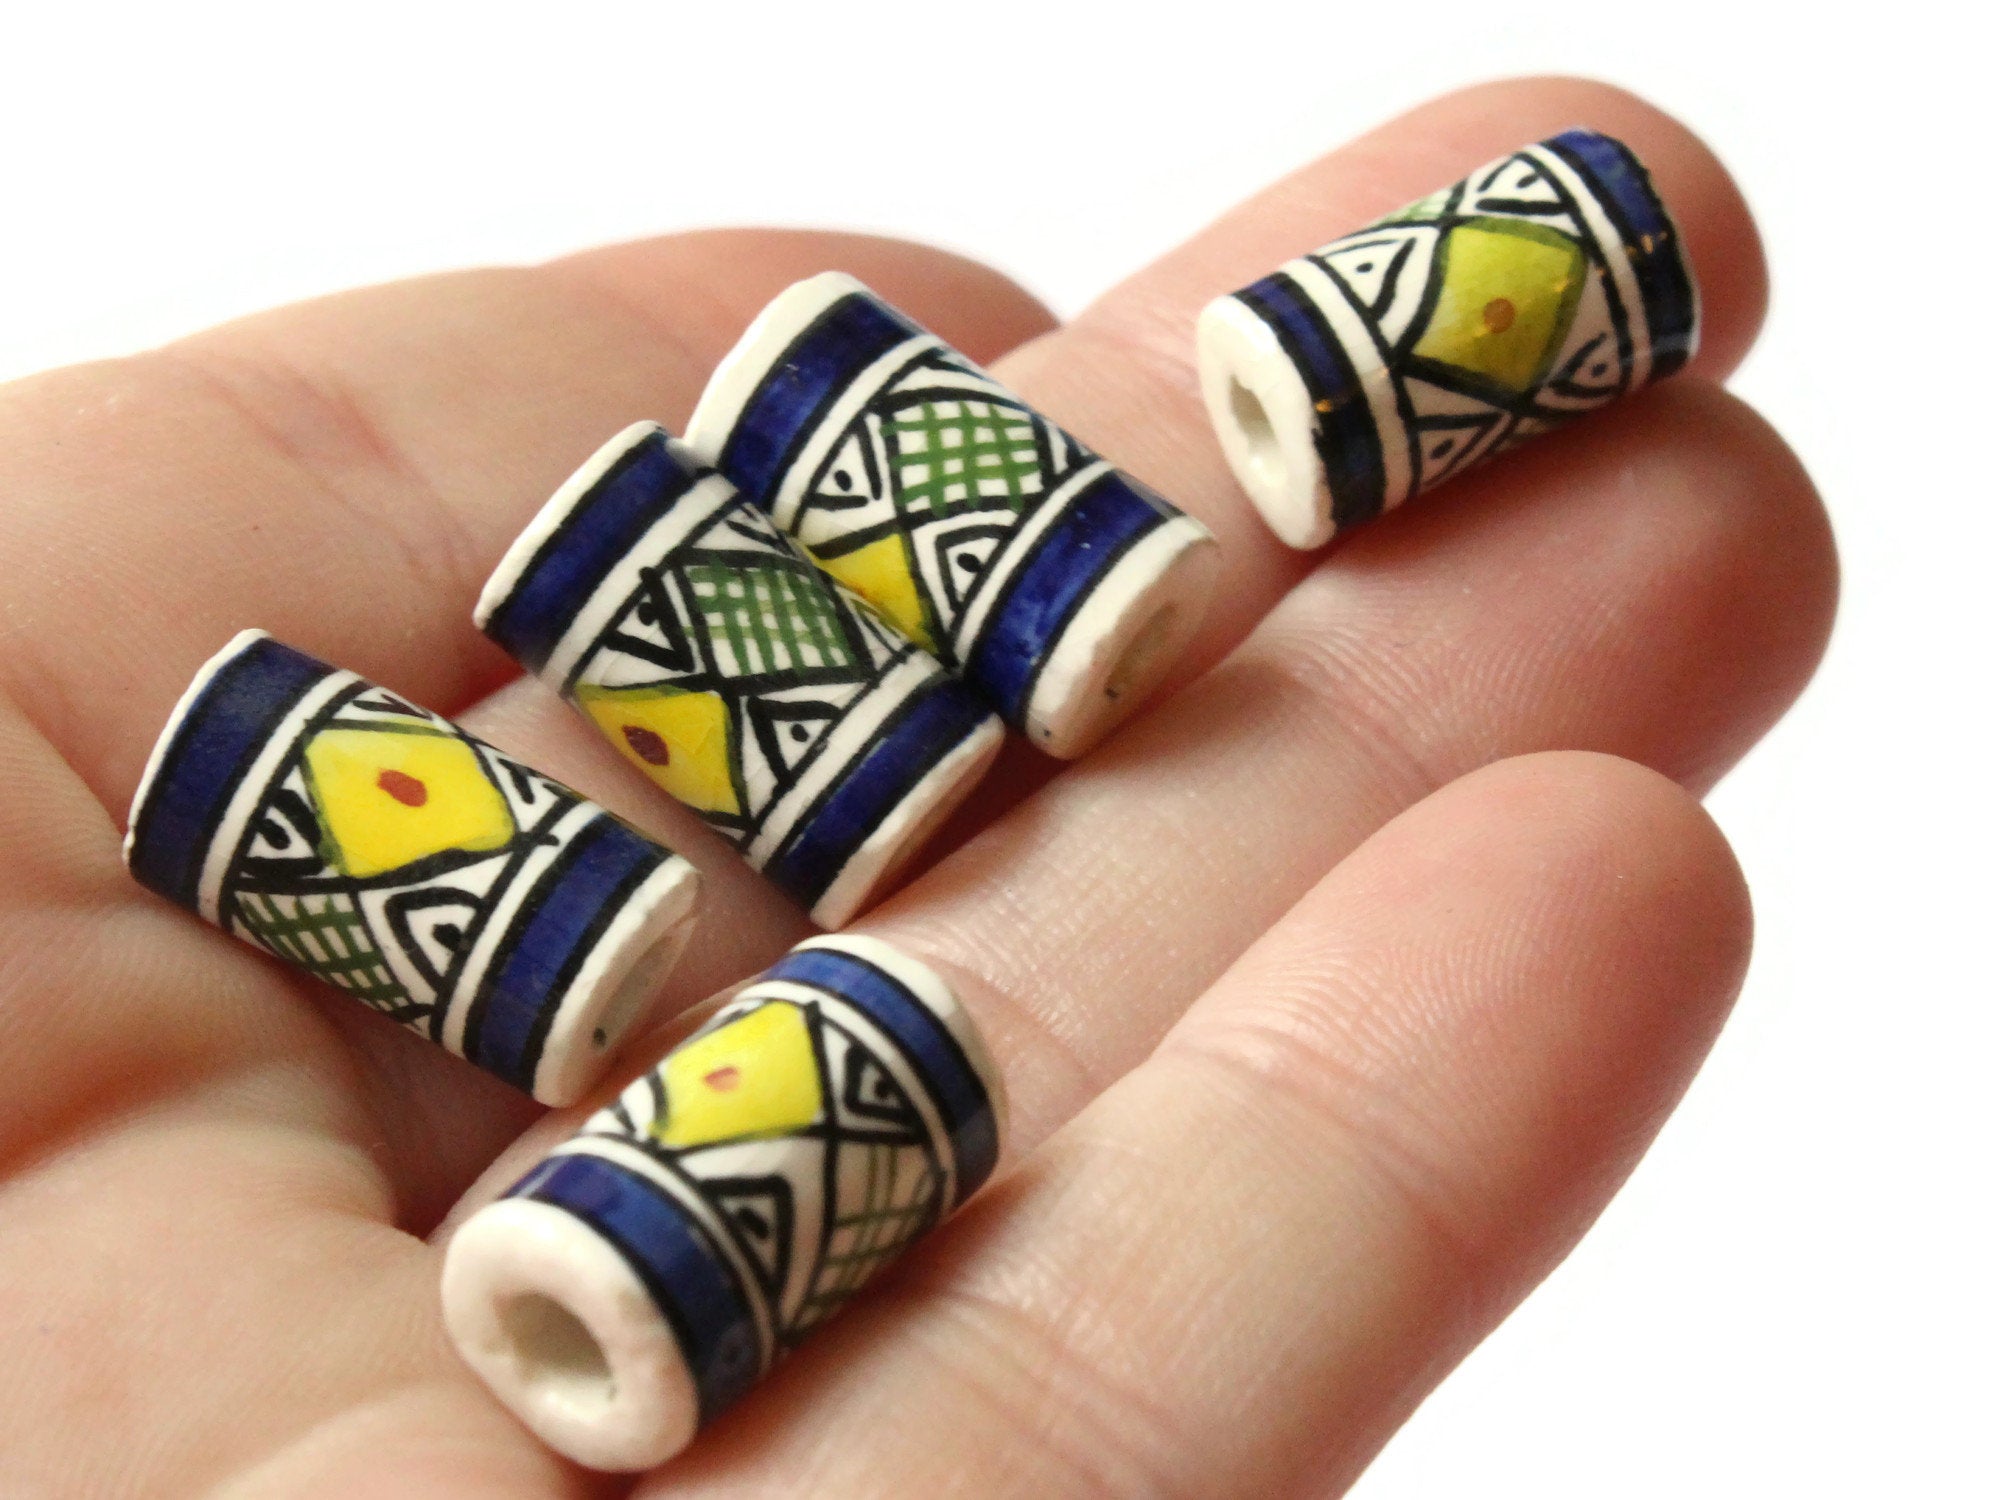 5 17mm Vintage Painted Peruvian Clay Beads - White Blue and Yellow Tube Beads by Smileyboy Beads | Michaels